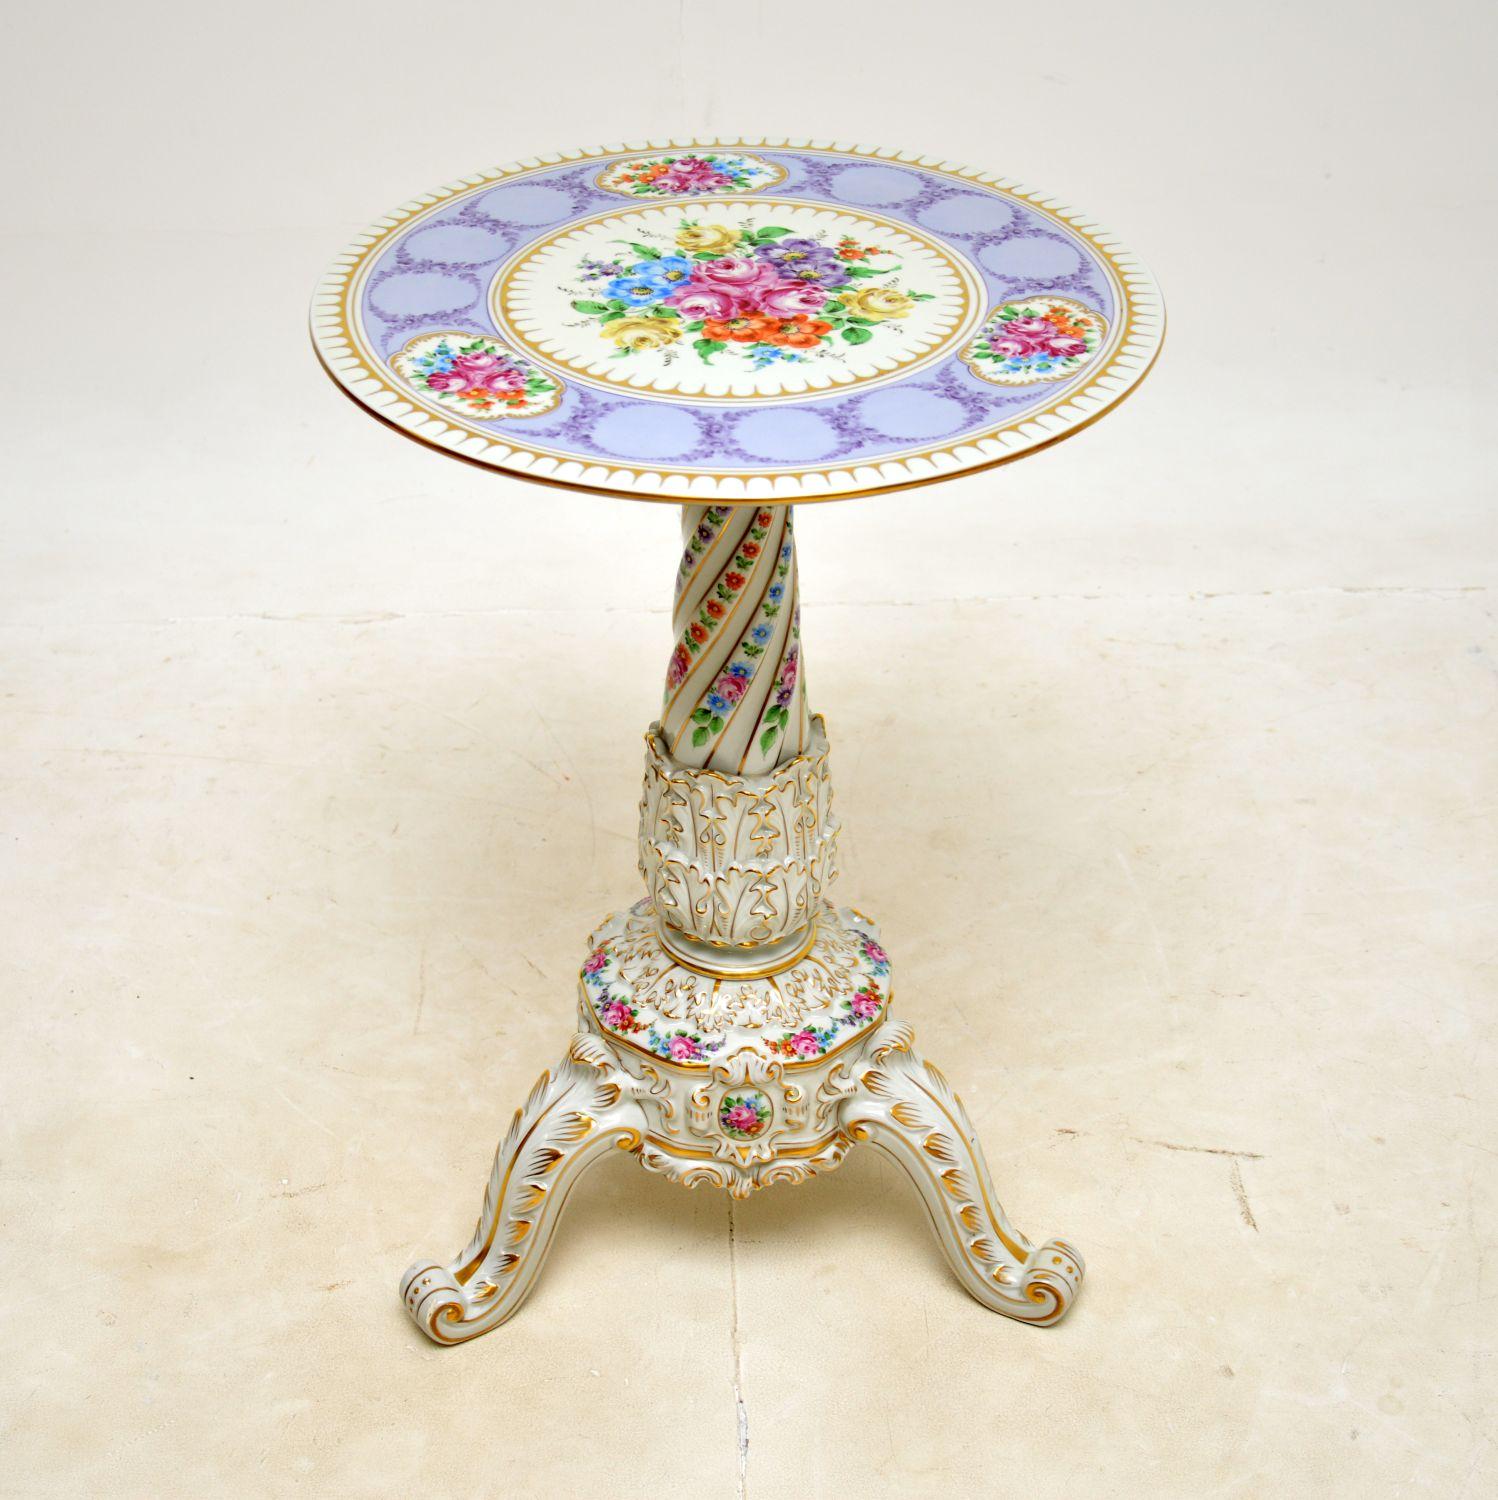 A stunning vintage German porcelain tripod table. This was made in Germany by Von Schierholz, it dates from around the 1960s.

The quality is outstanding, this is beautifully made, with amazing details throughout. The hand painted floral decorations